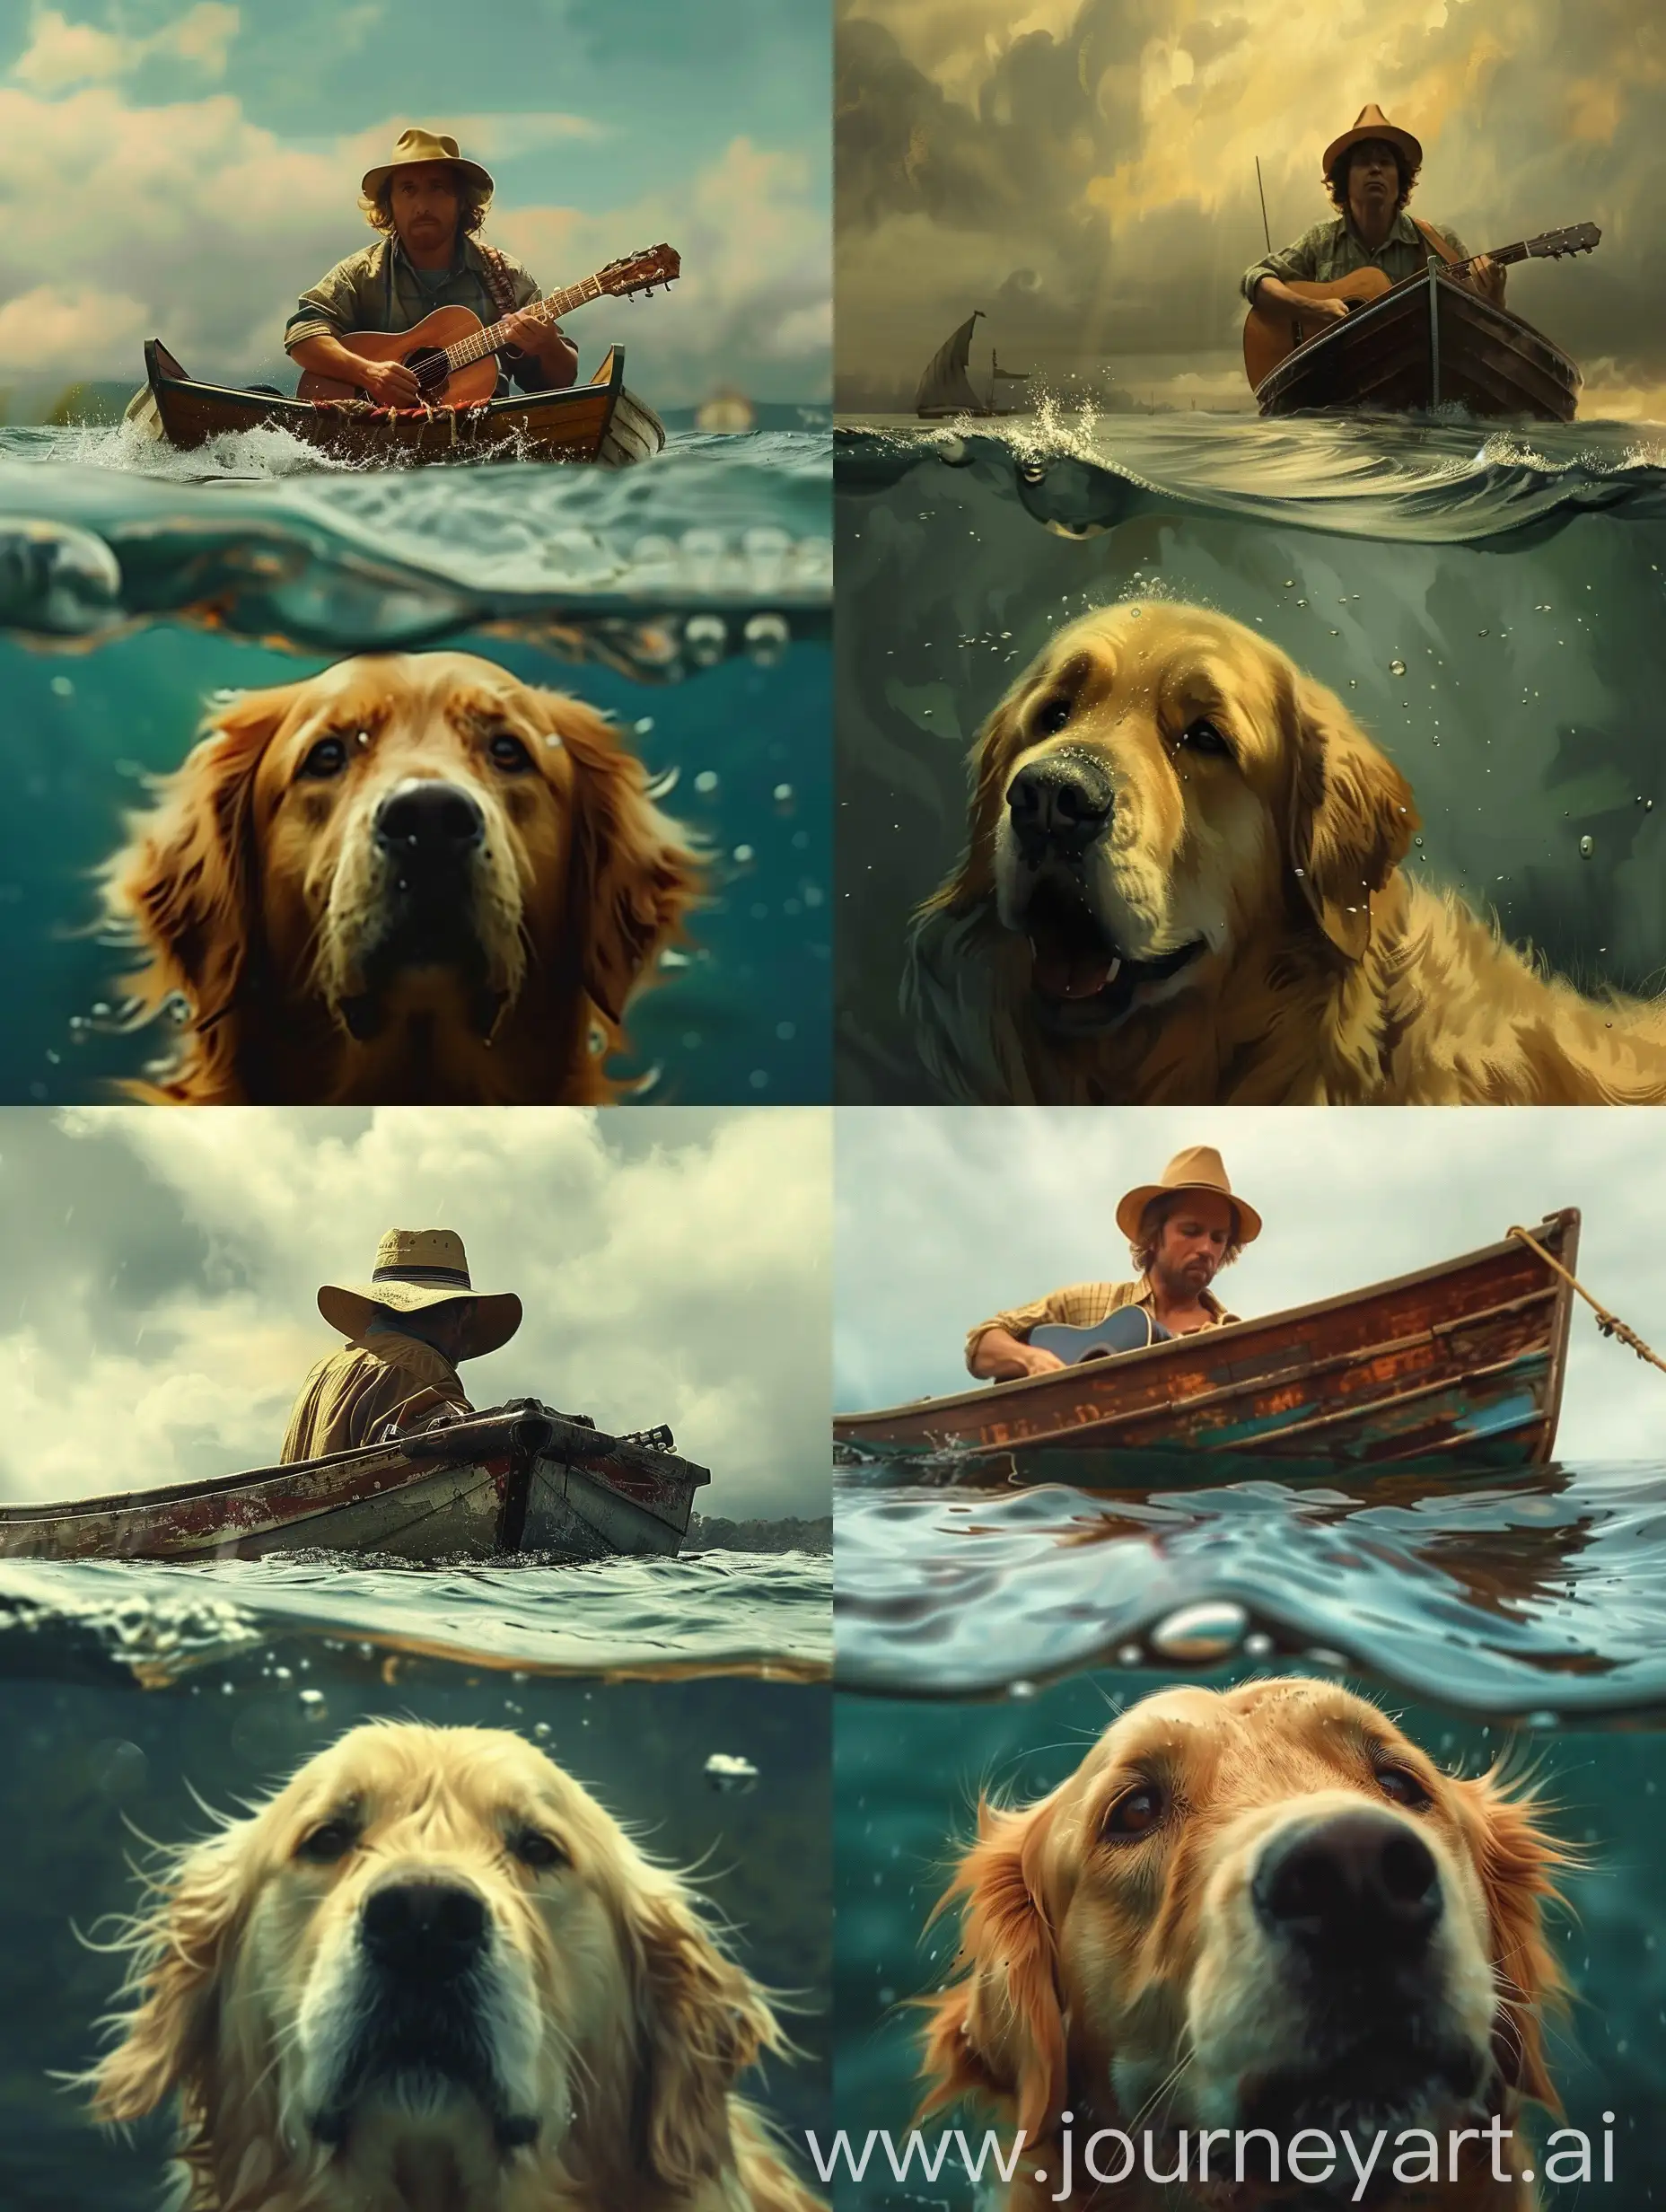 Man-Playing-Guitar-in-Boat-with-Golden-Retriever